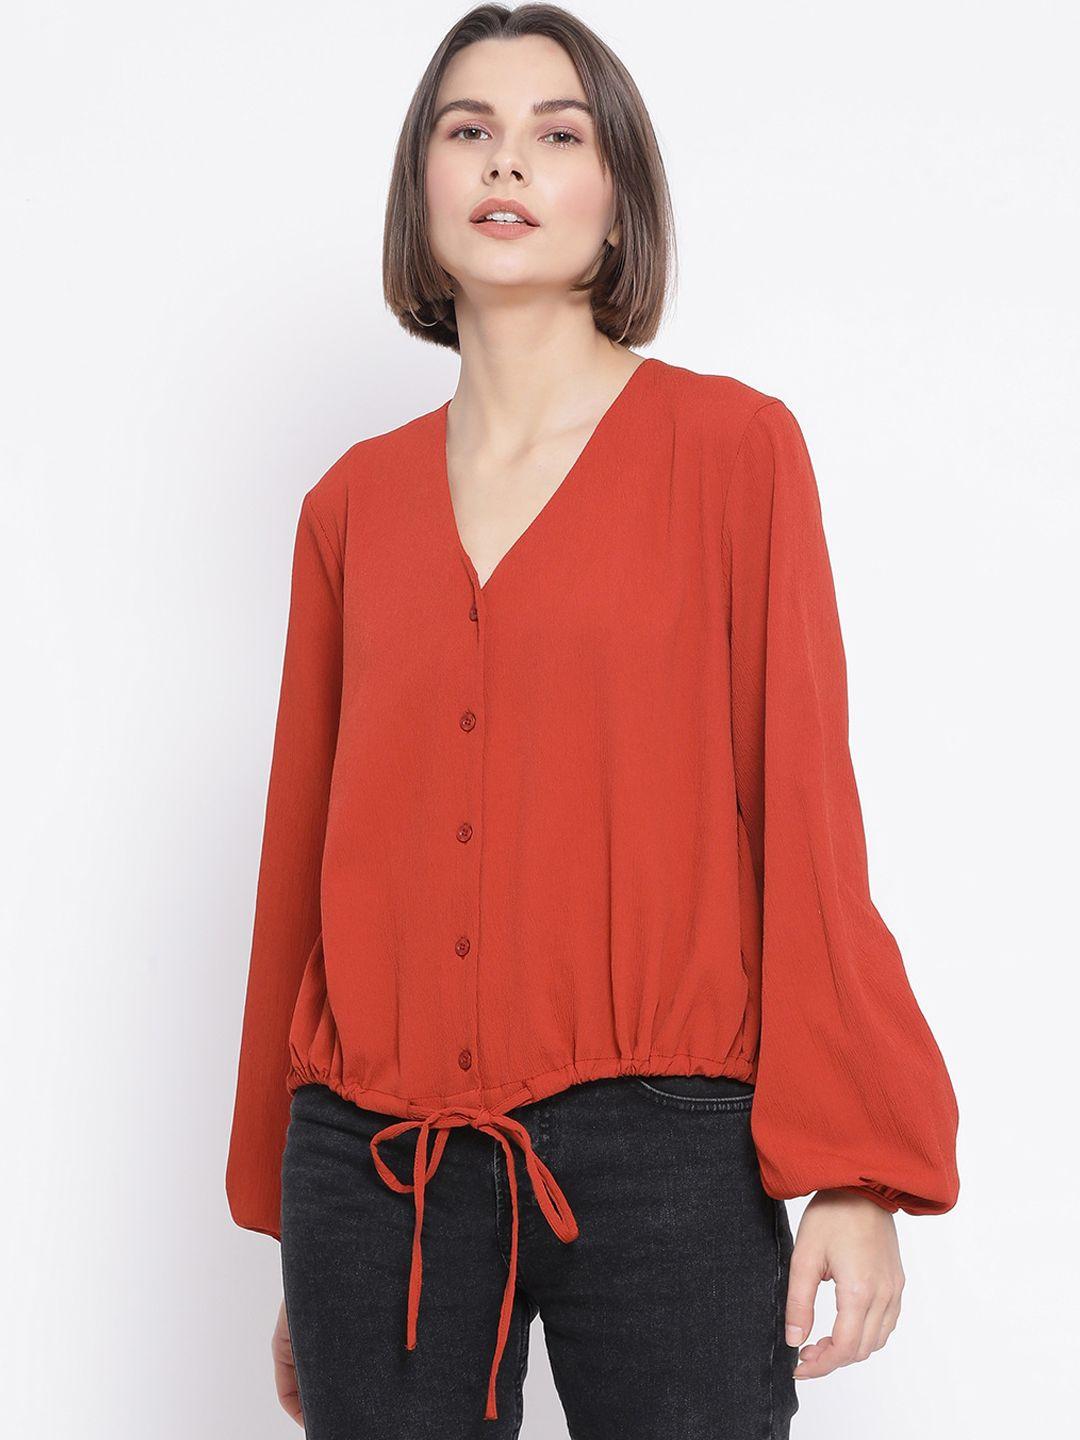 oxolloxo women red solid shirt style top